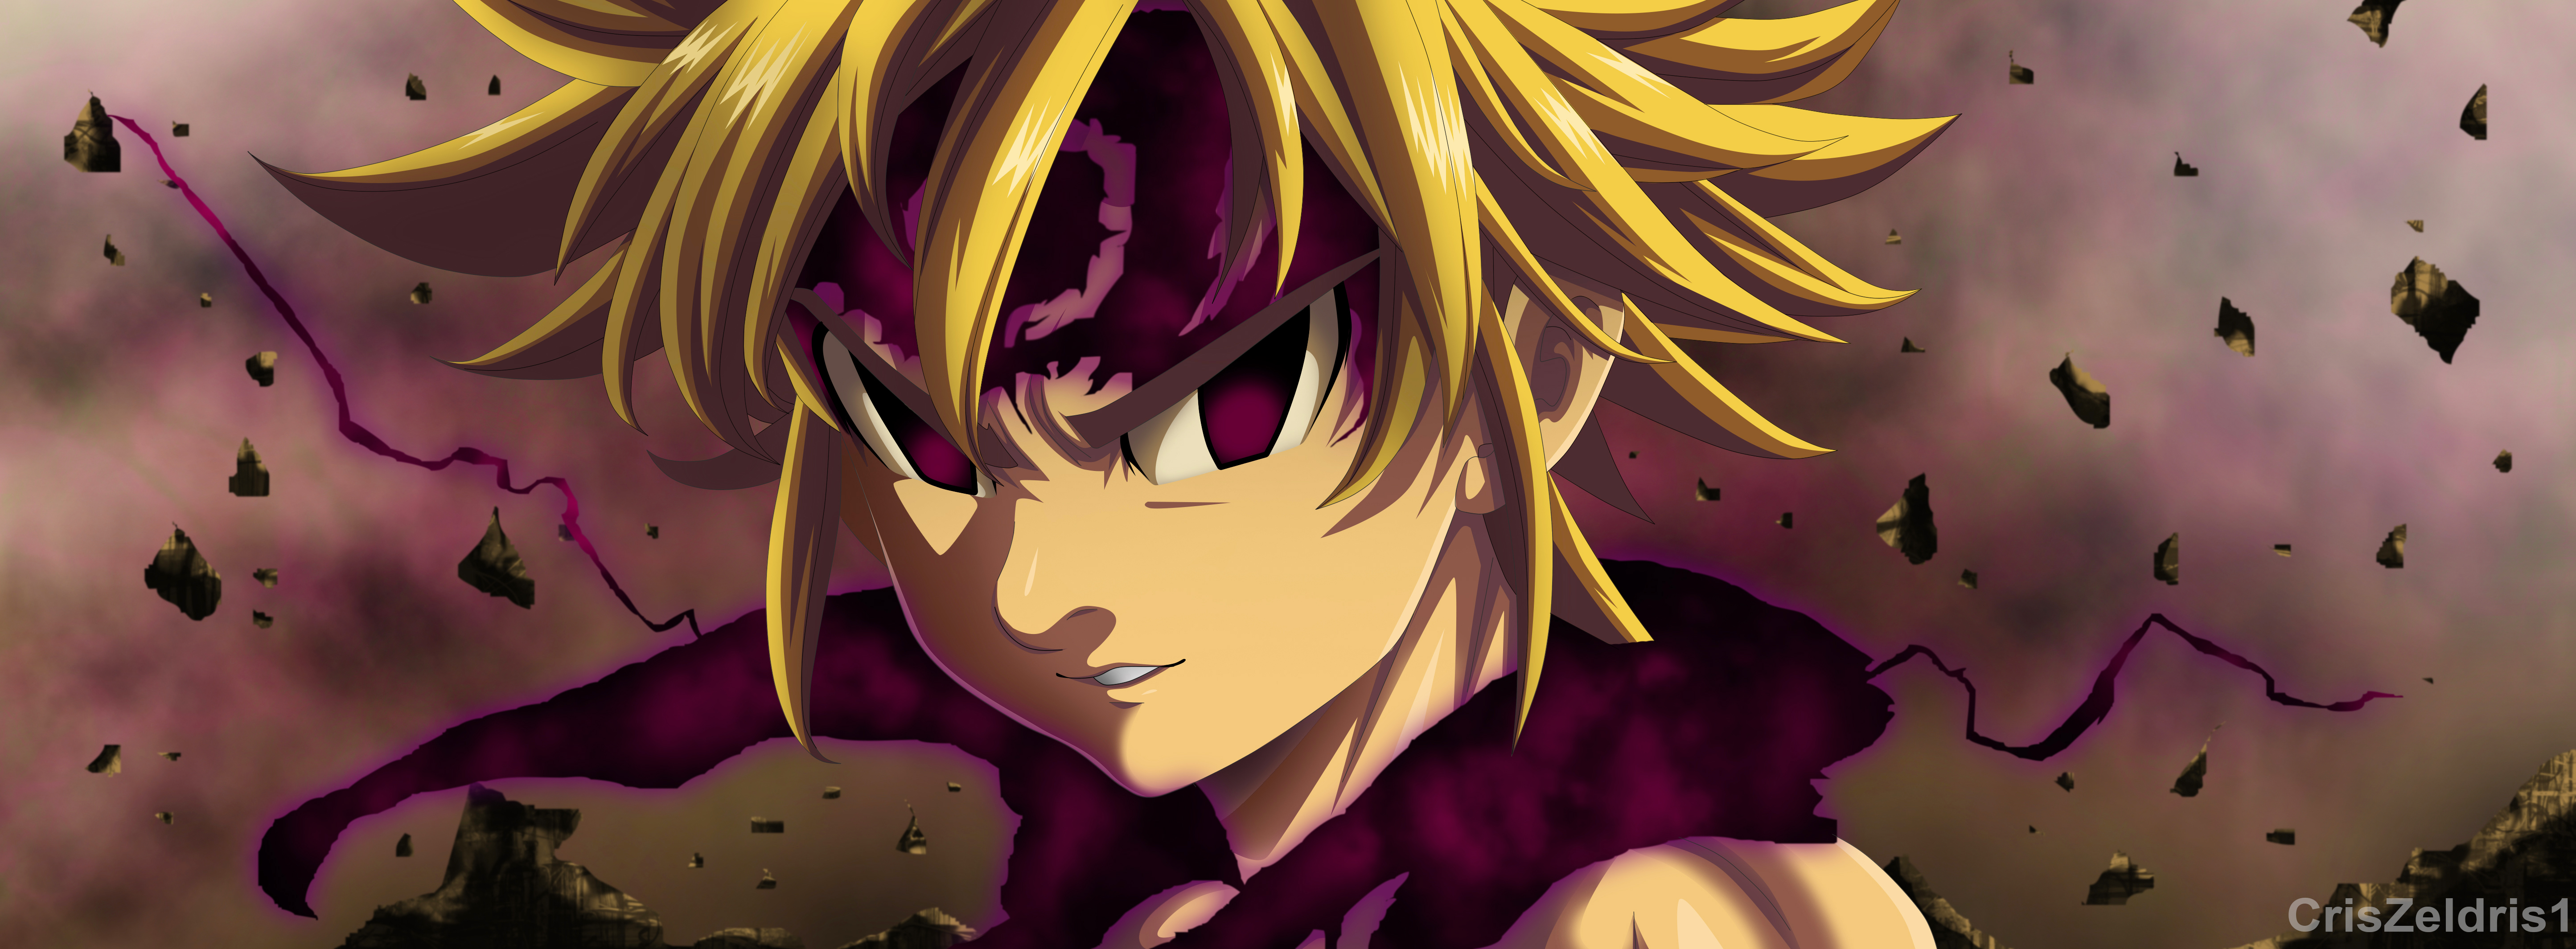 The Seven Deadly Sins, HD Anime, 4k Wallpapers, Images ...